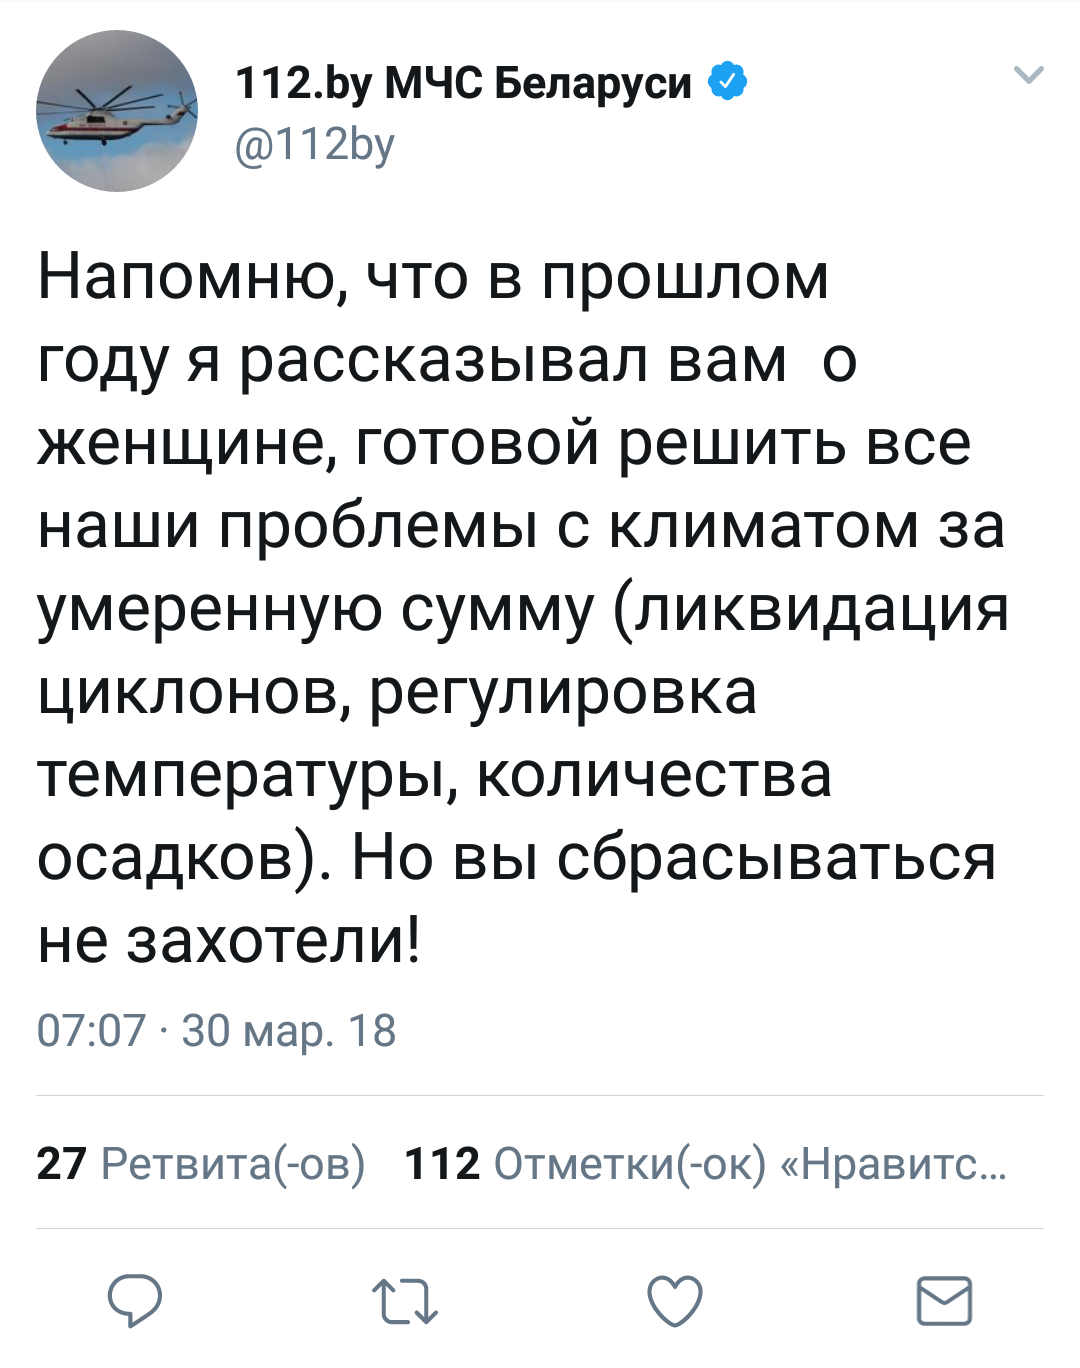 Ministry of Emergency Situations is joking) - Service 112, Ministry of Emergency Situations, Twitter, Screenshot